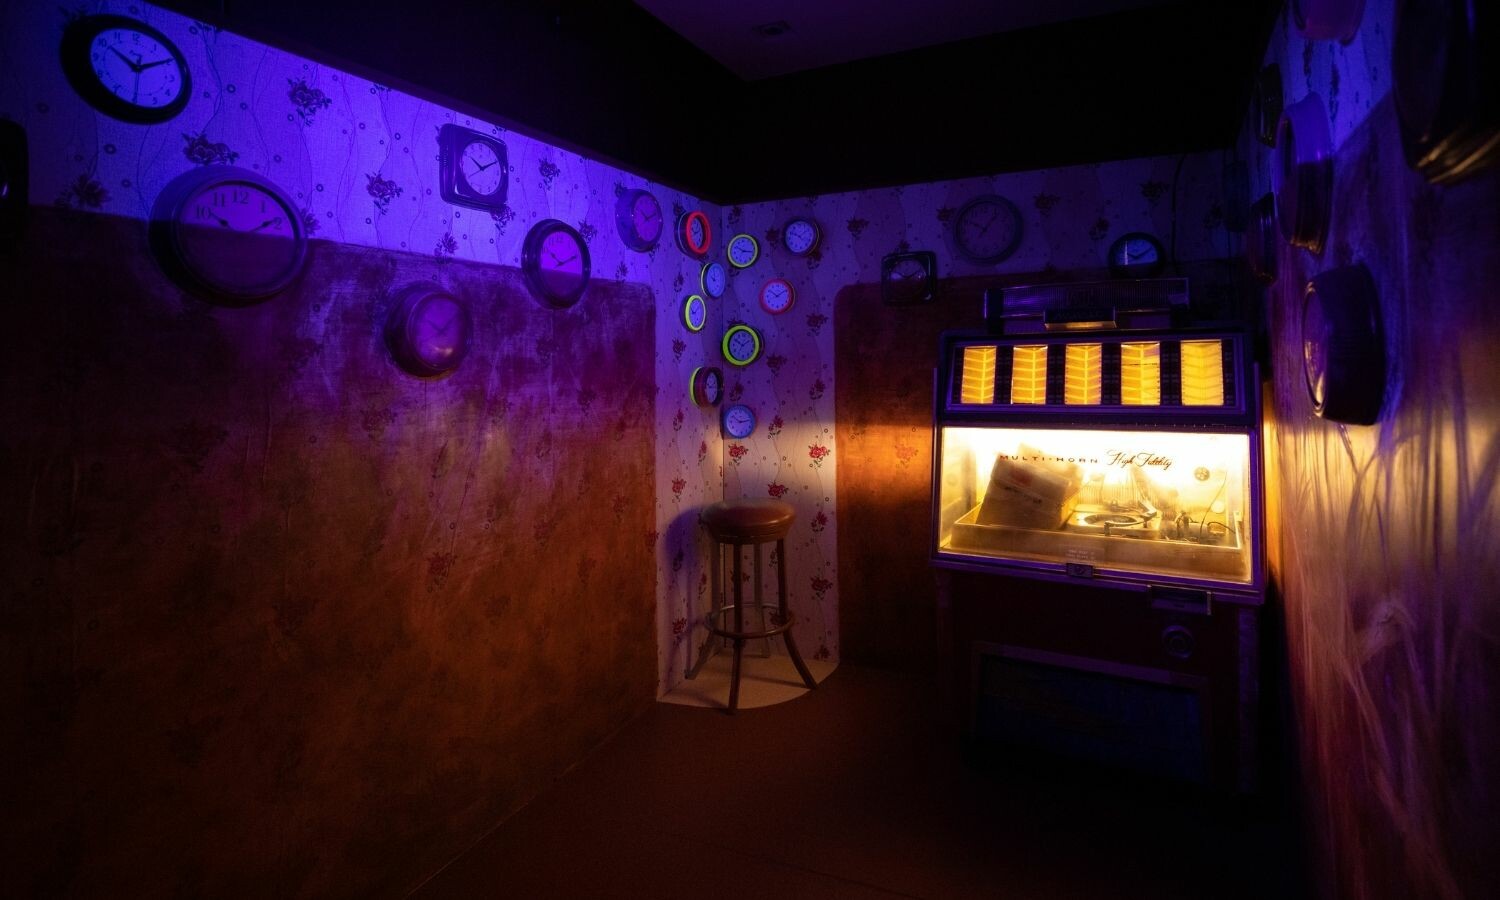 A dimly lit room with purple lighting, several clocks on the walls, a stool, and a jukebox.